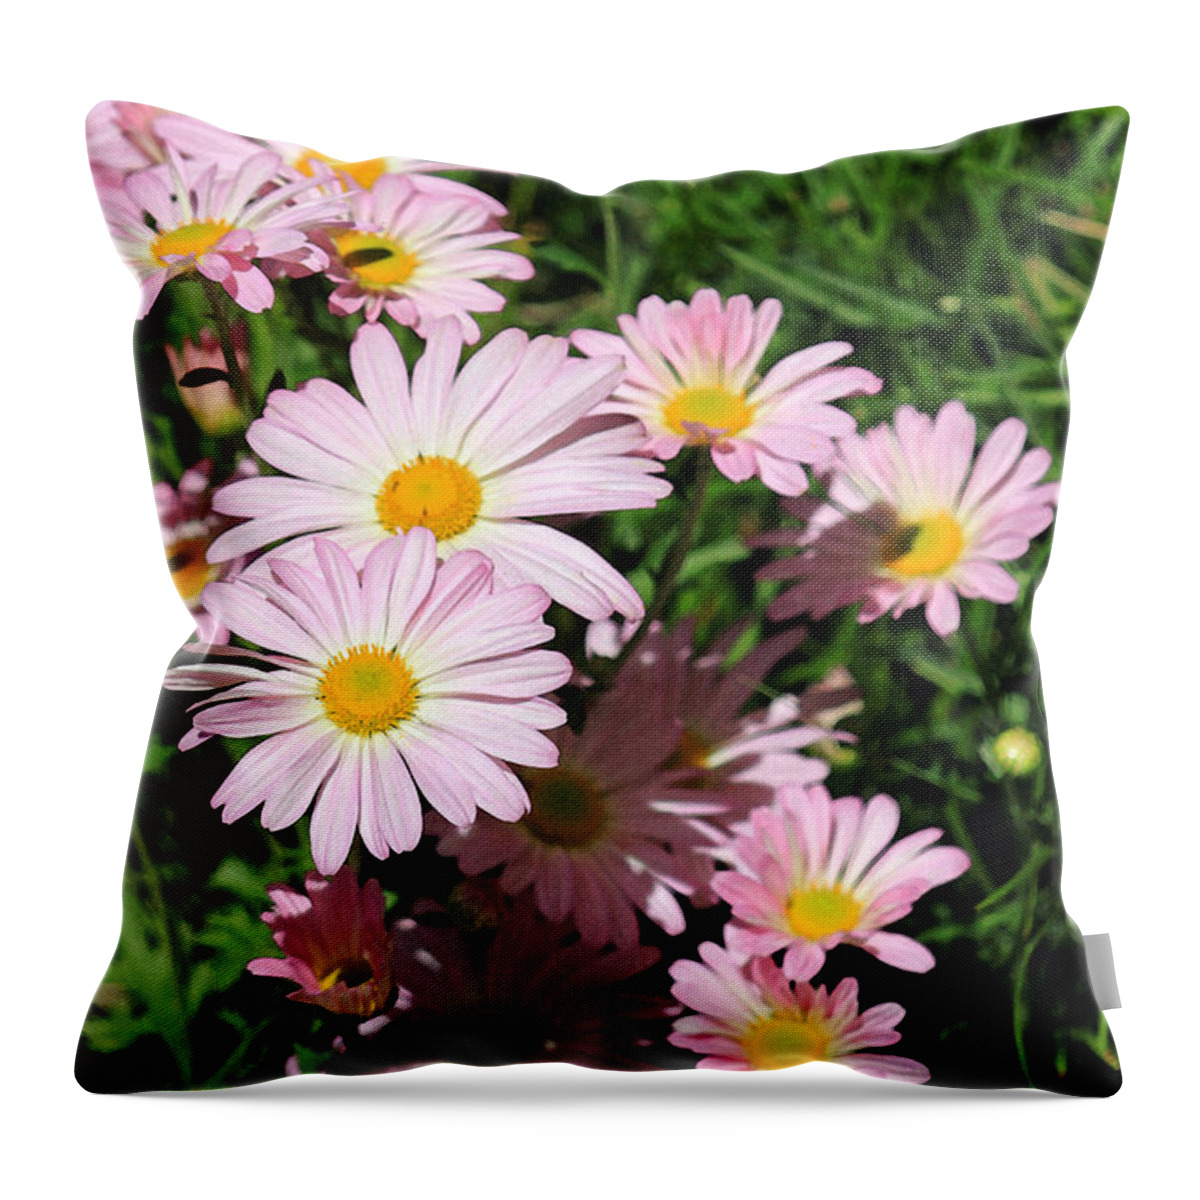 Daisy Throw Pillow featuring the photograph Lazy Daisy Mums by Suzanne Gaff